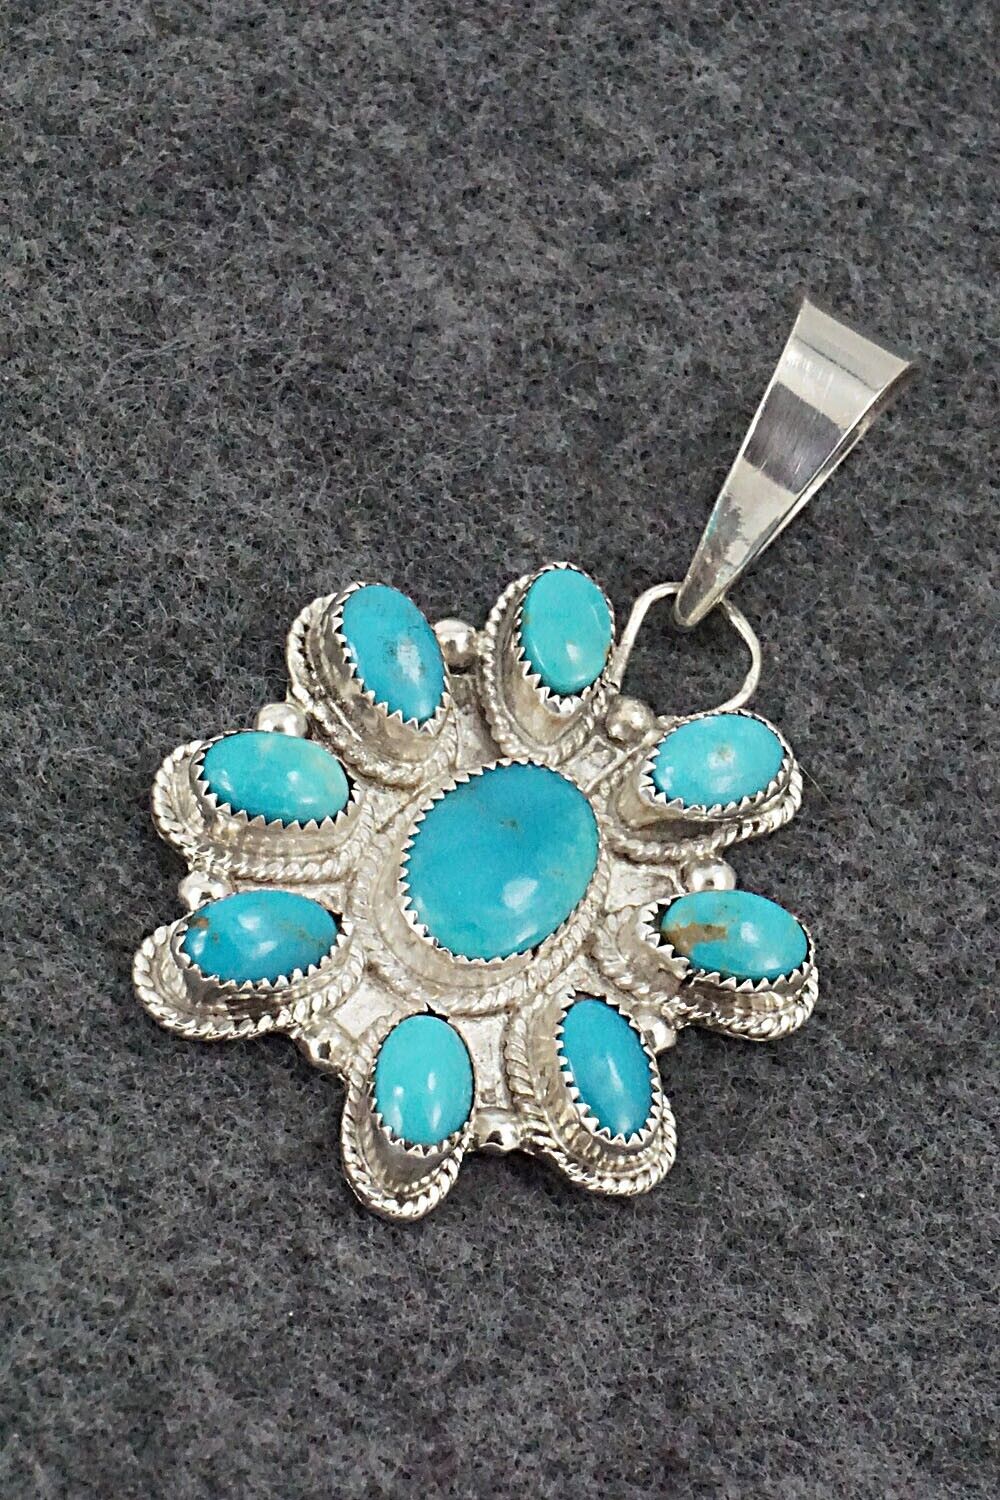 Turquoise & Sterling Silver Pendant - Kenny Calavaza